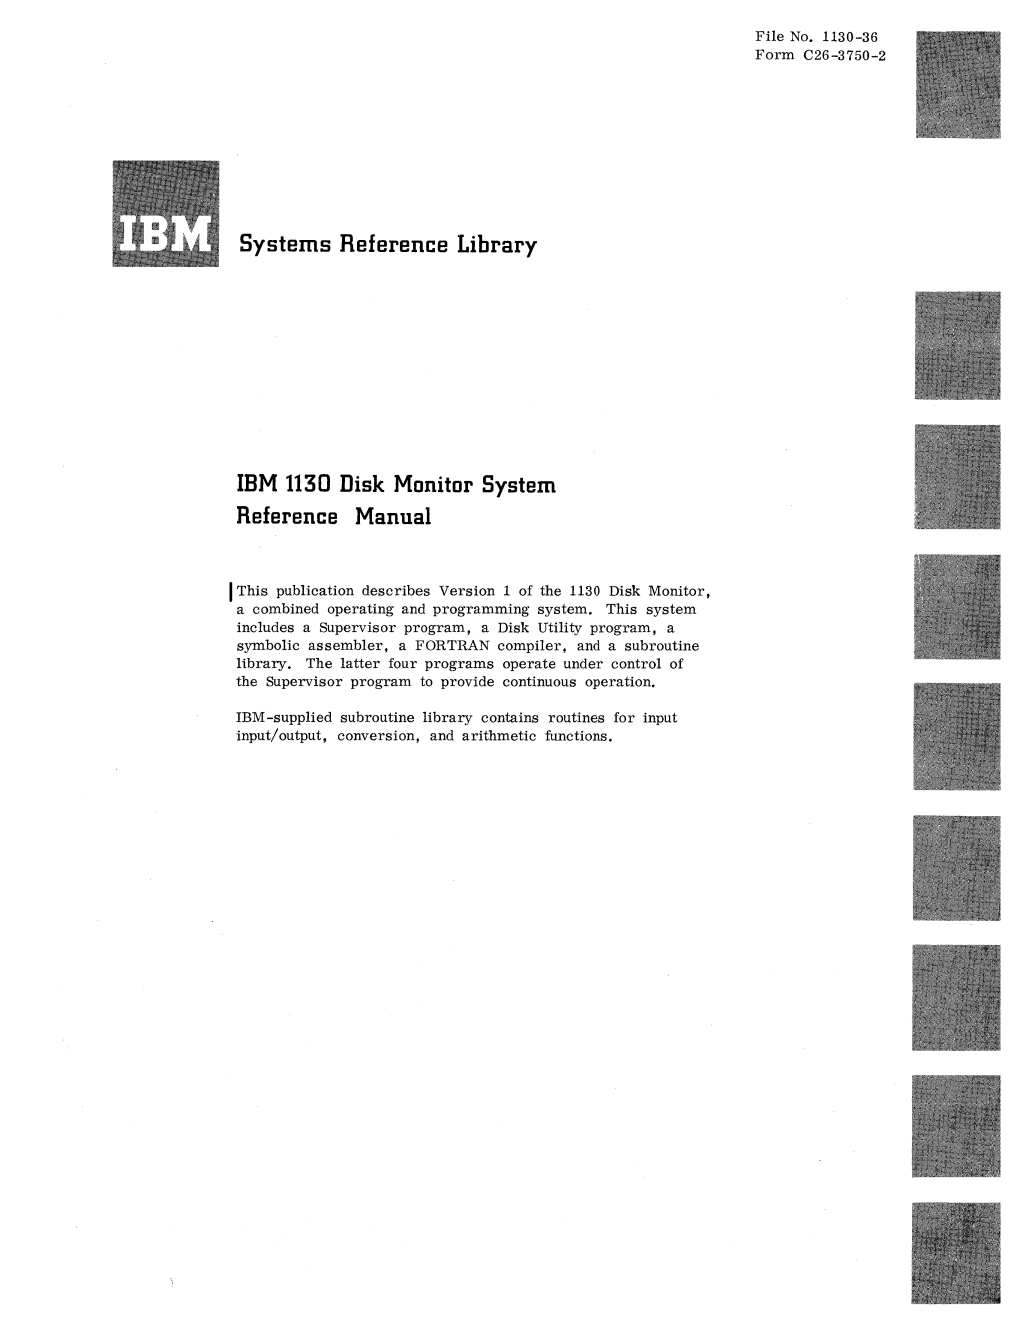 IBM 1130 Disk Monitor System Reference Manual